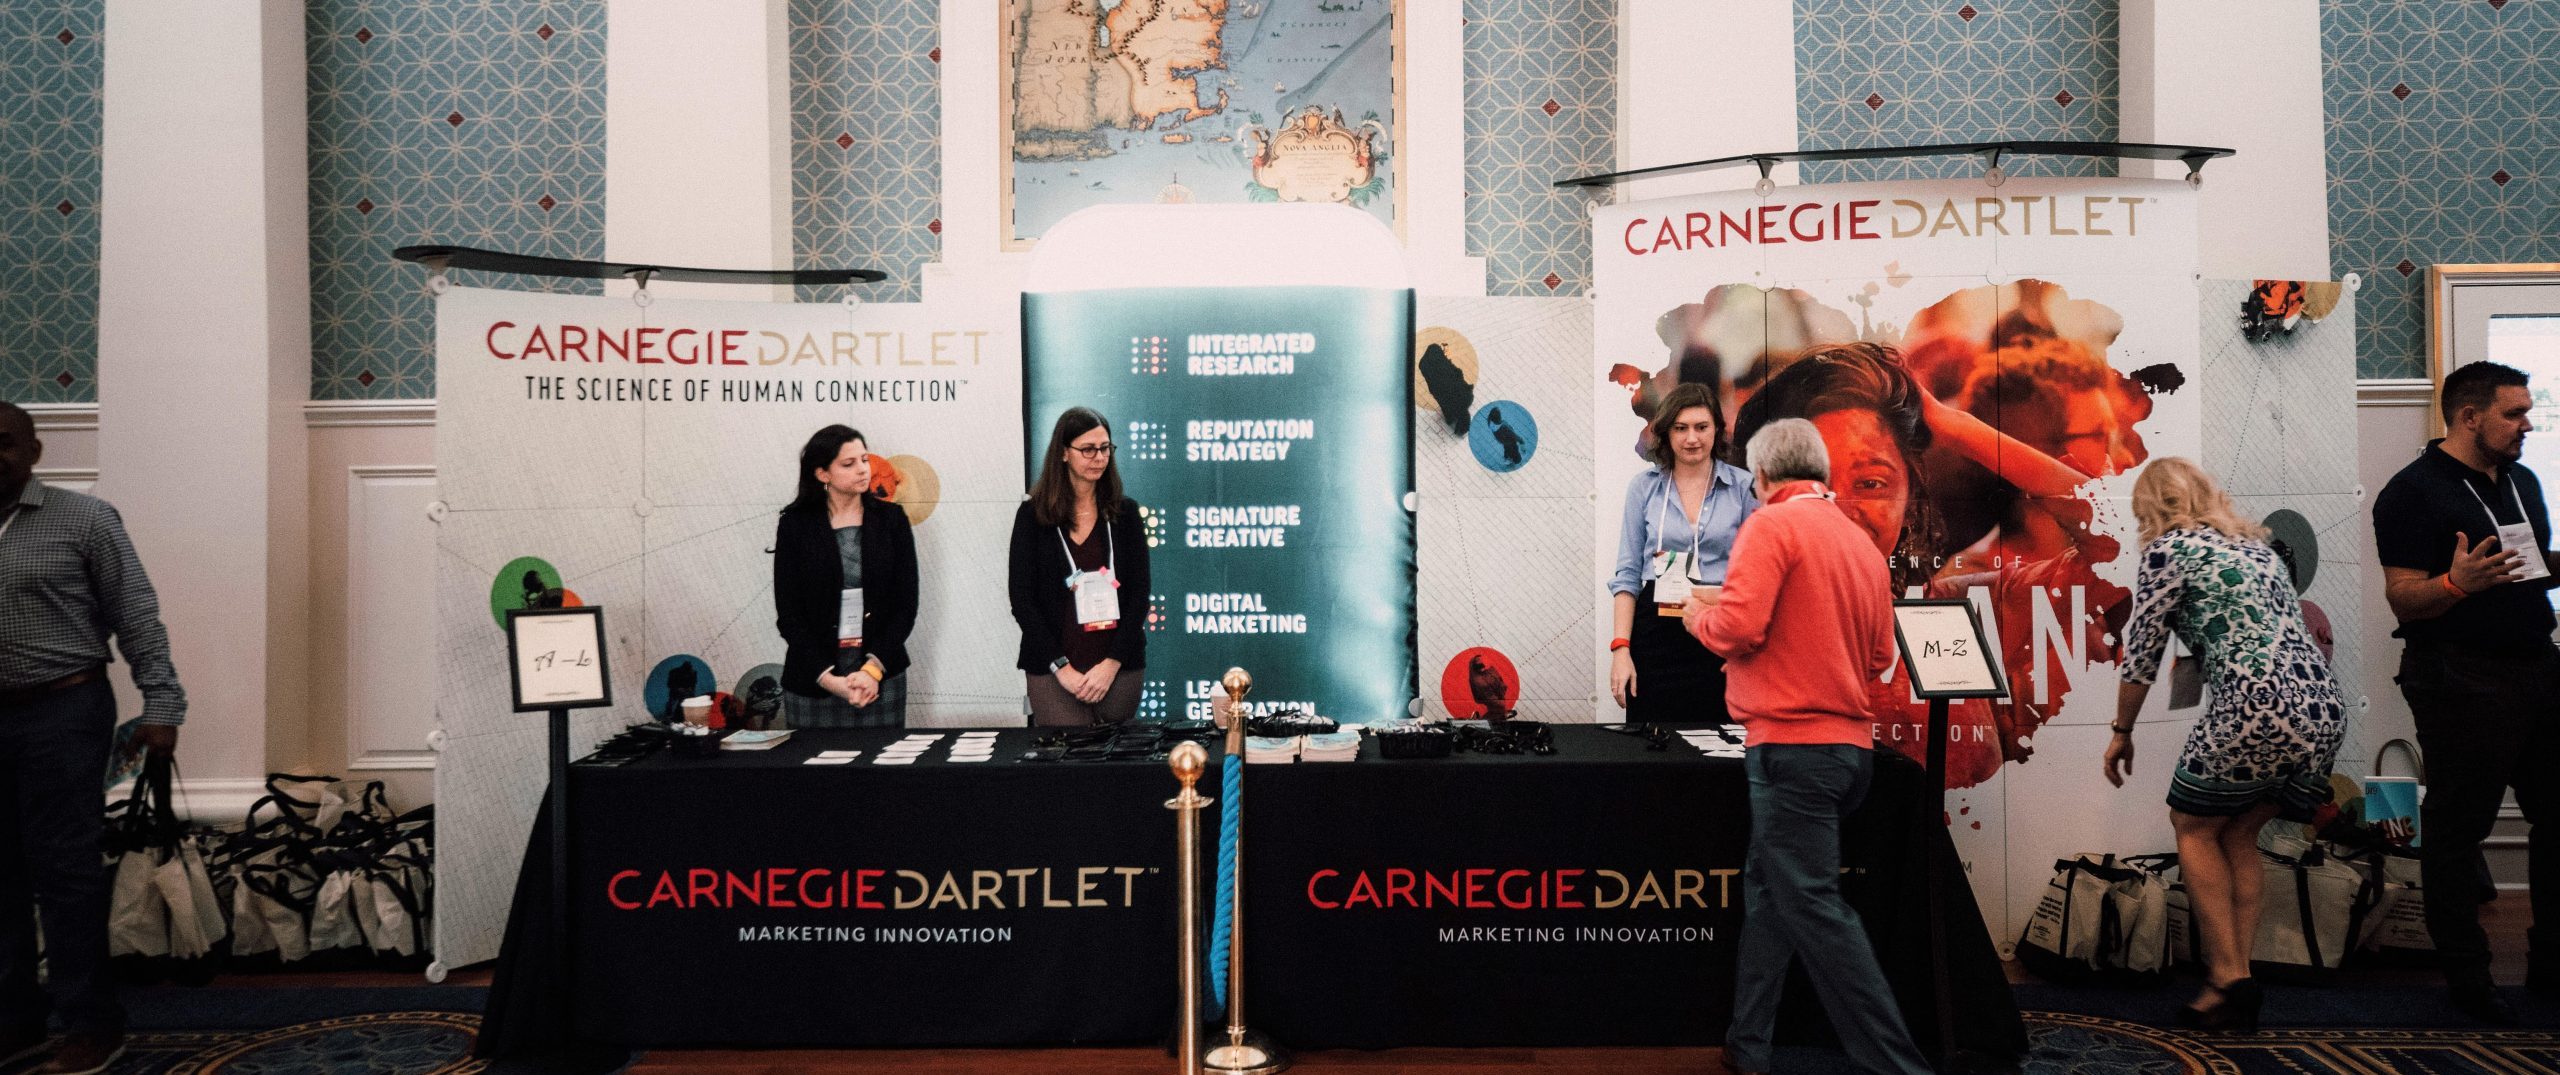 Carnegie conference booth. Carnegie employees engaging with visitors with Carnegie banners in the background